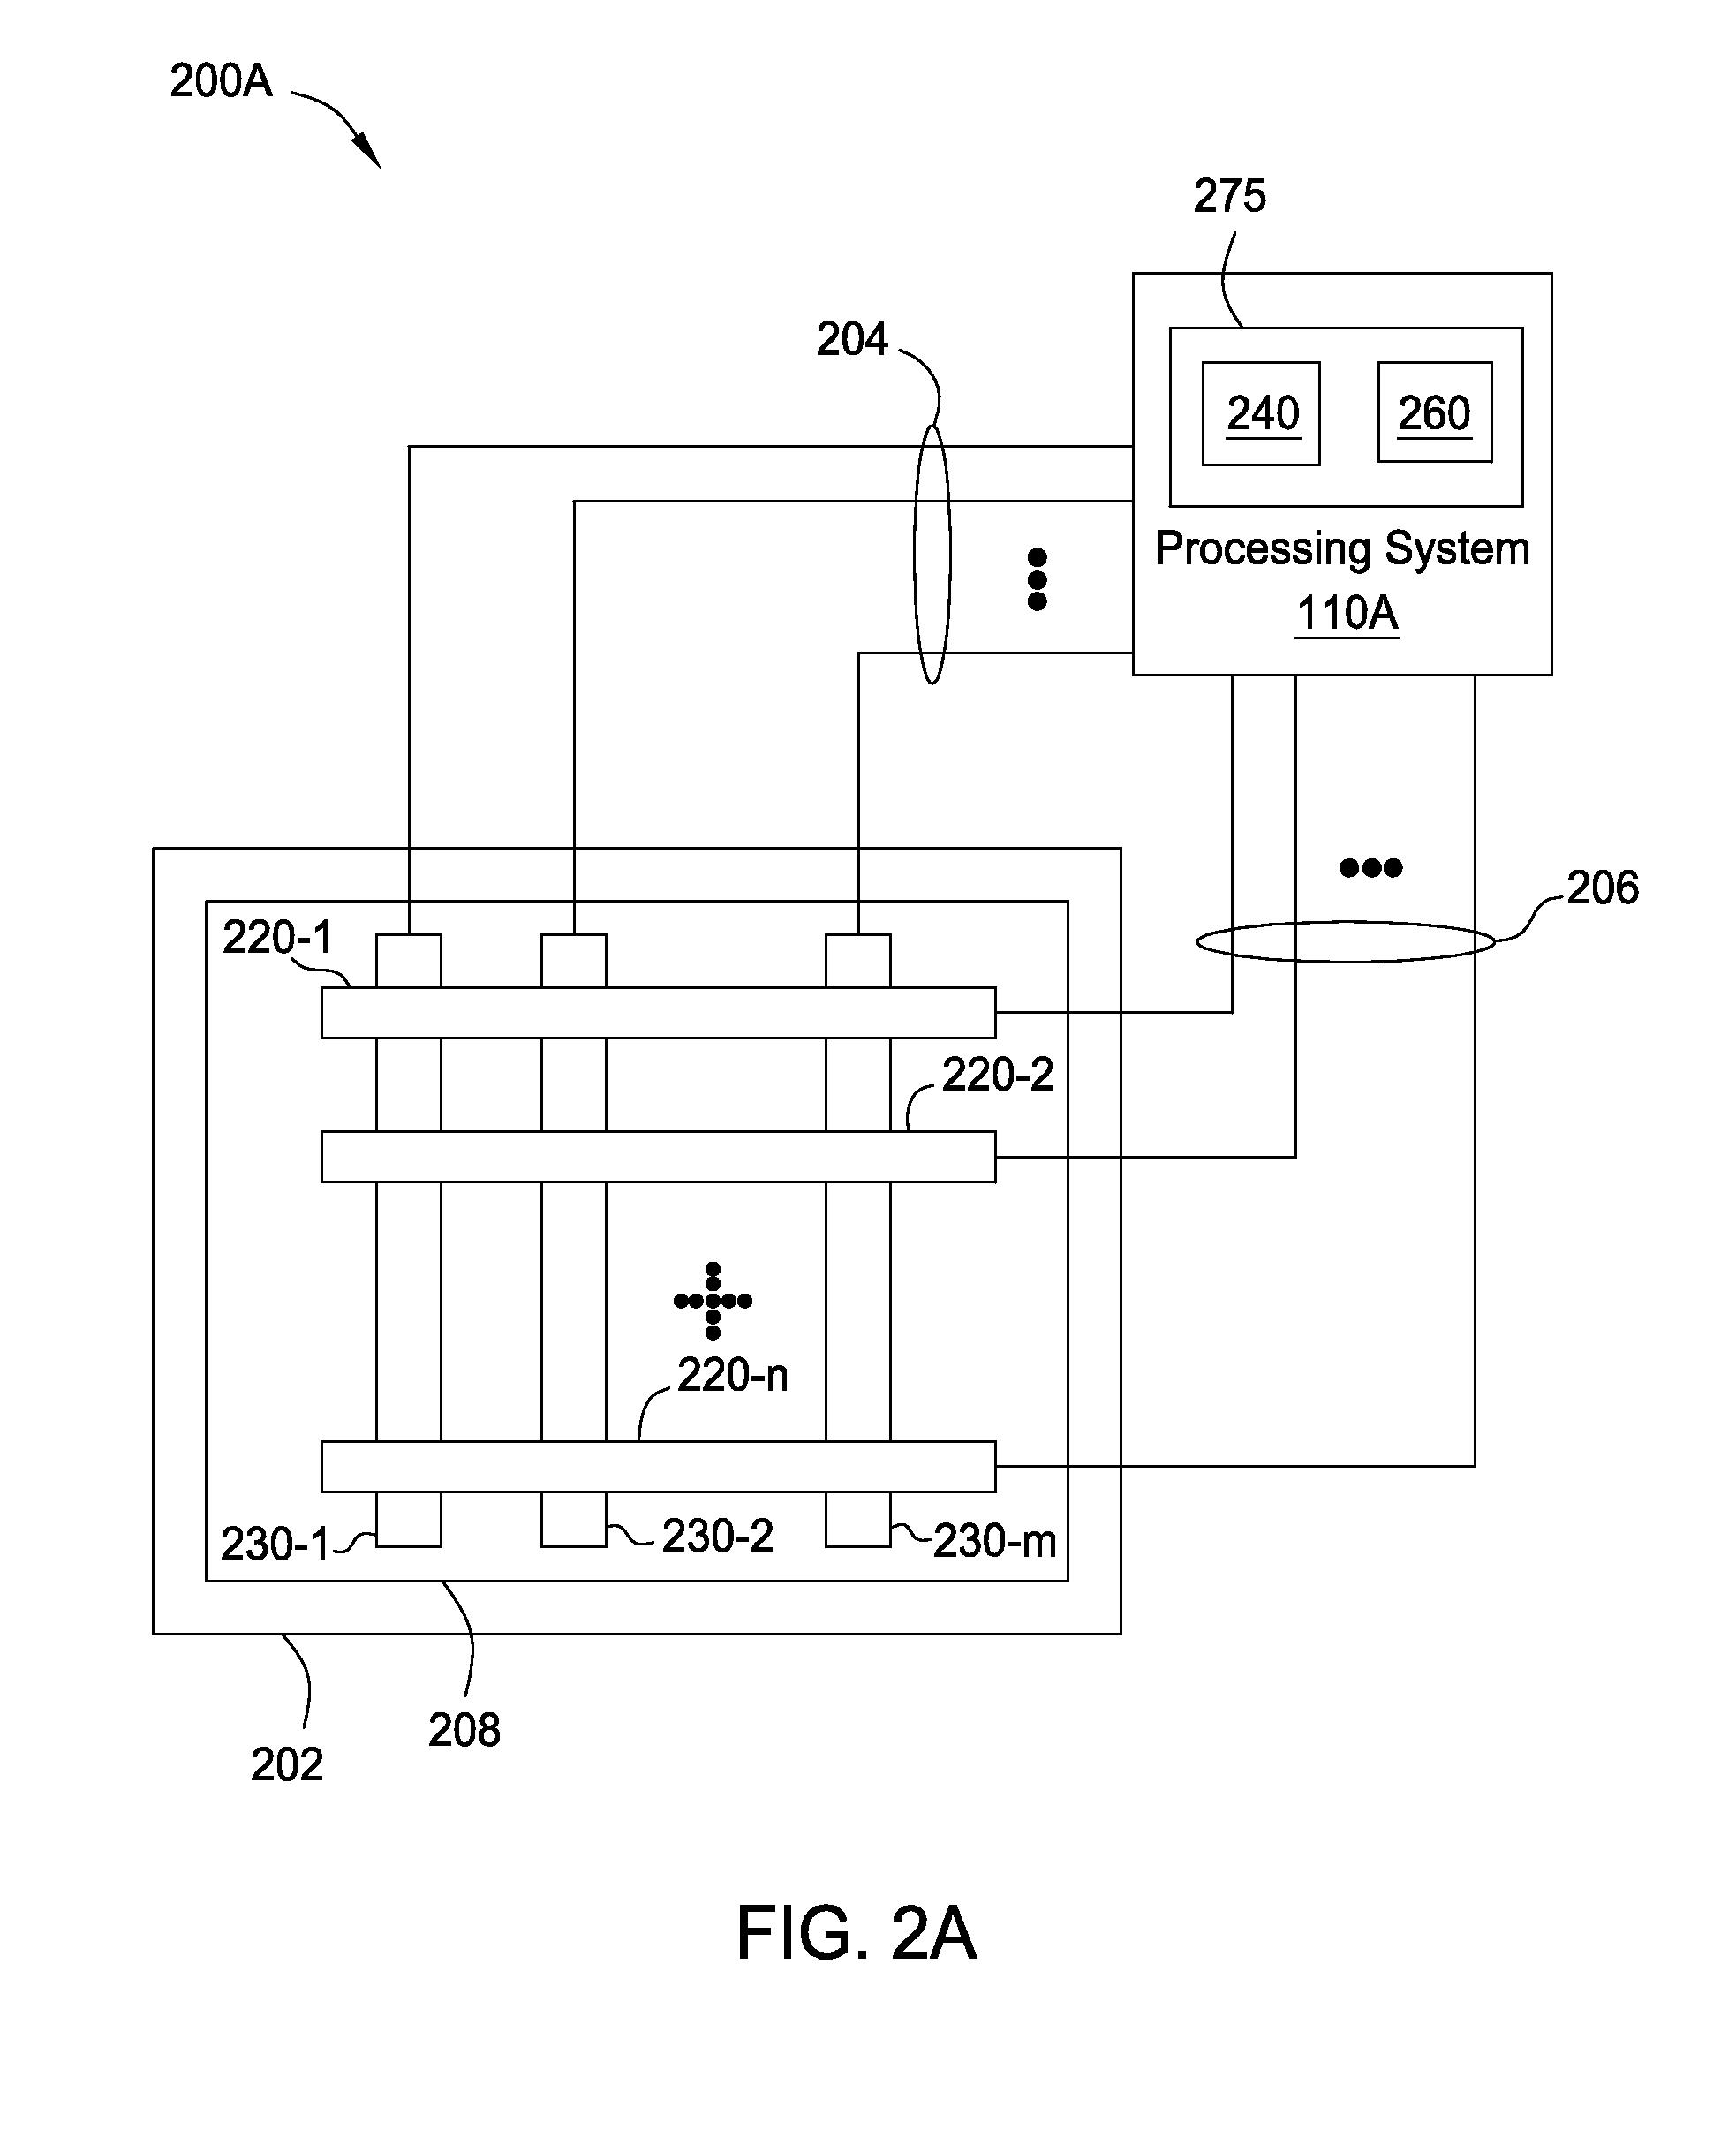 Real-time spectral noise monitoring for proximity sensing device